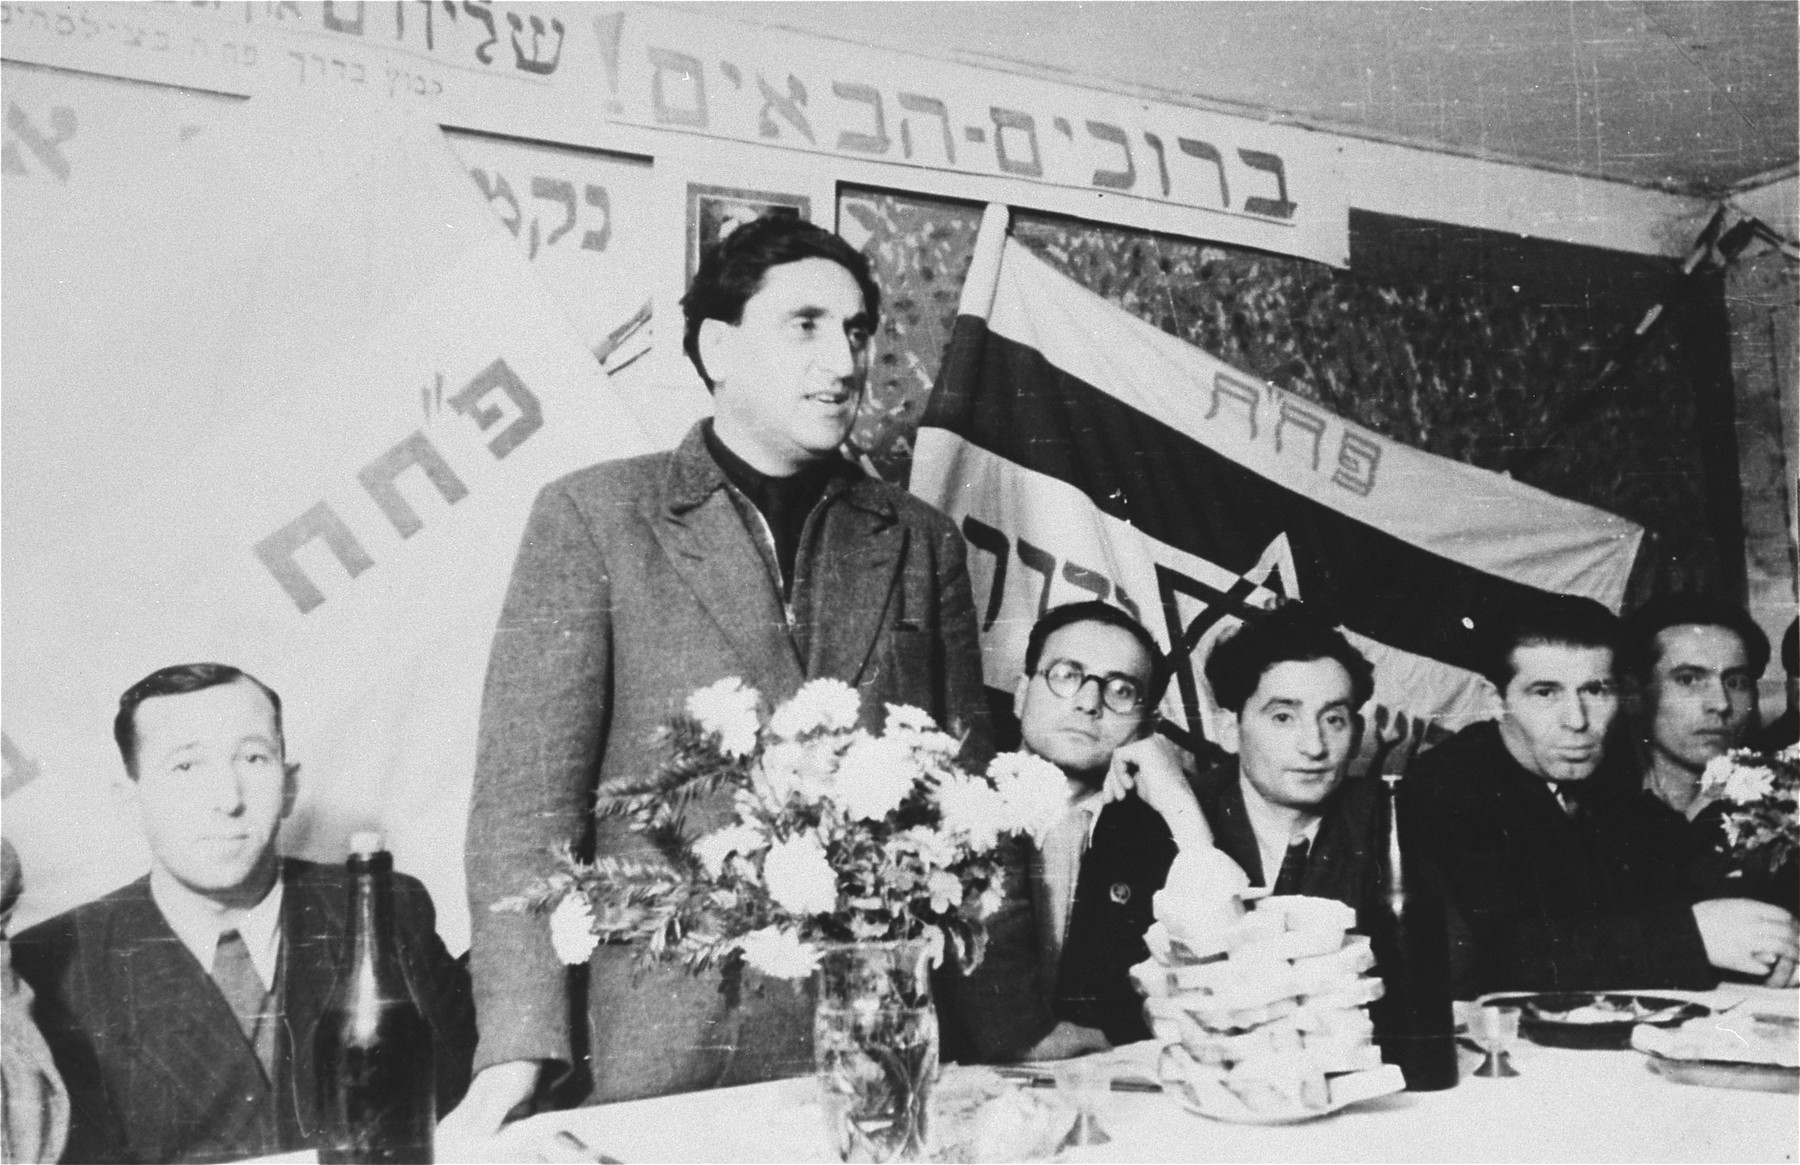 An unidentified man addresses the audience in a P.H.H. Zionist political meeting in the Zeilsheim displaced persons' camp.